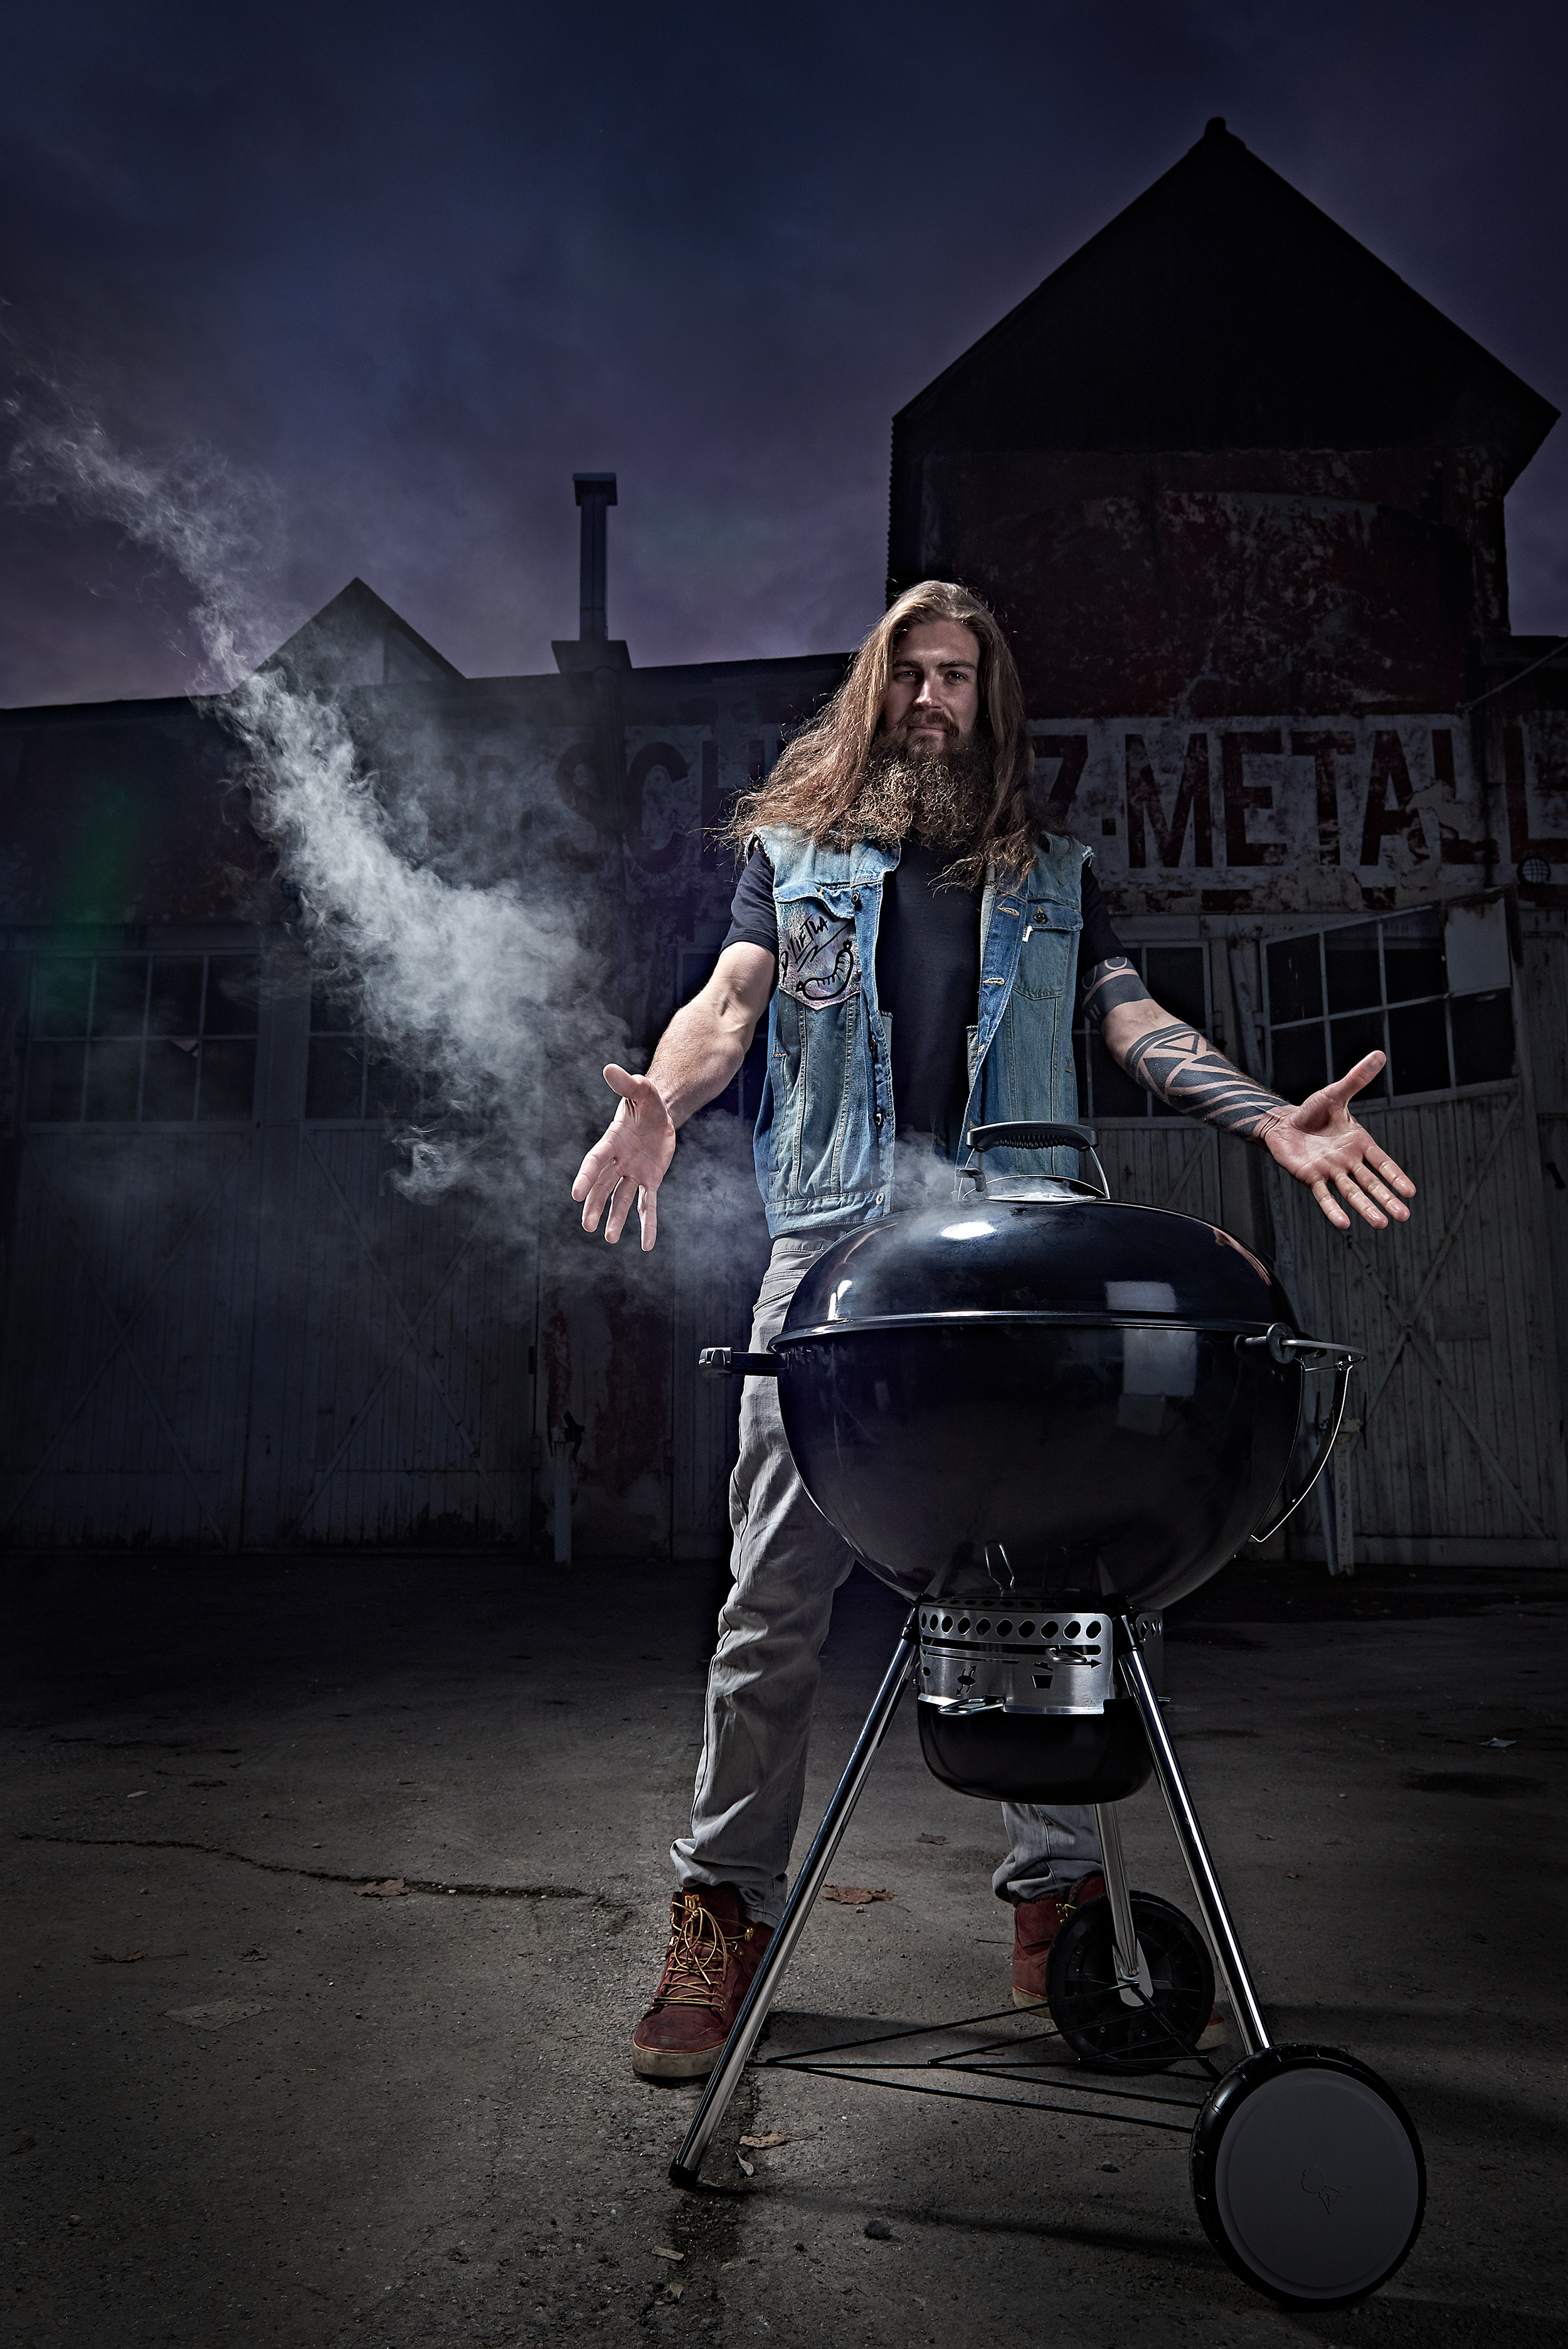 man with arms spread stands behind a barbecue, grilling dinner in front of a industrial location outside shooting